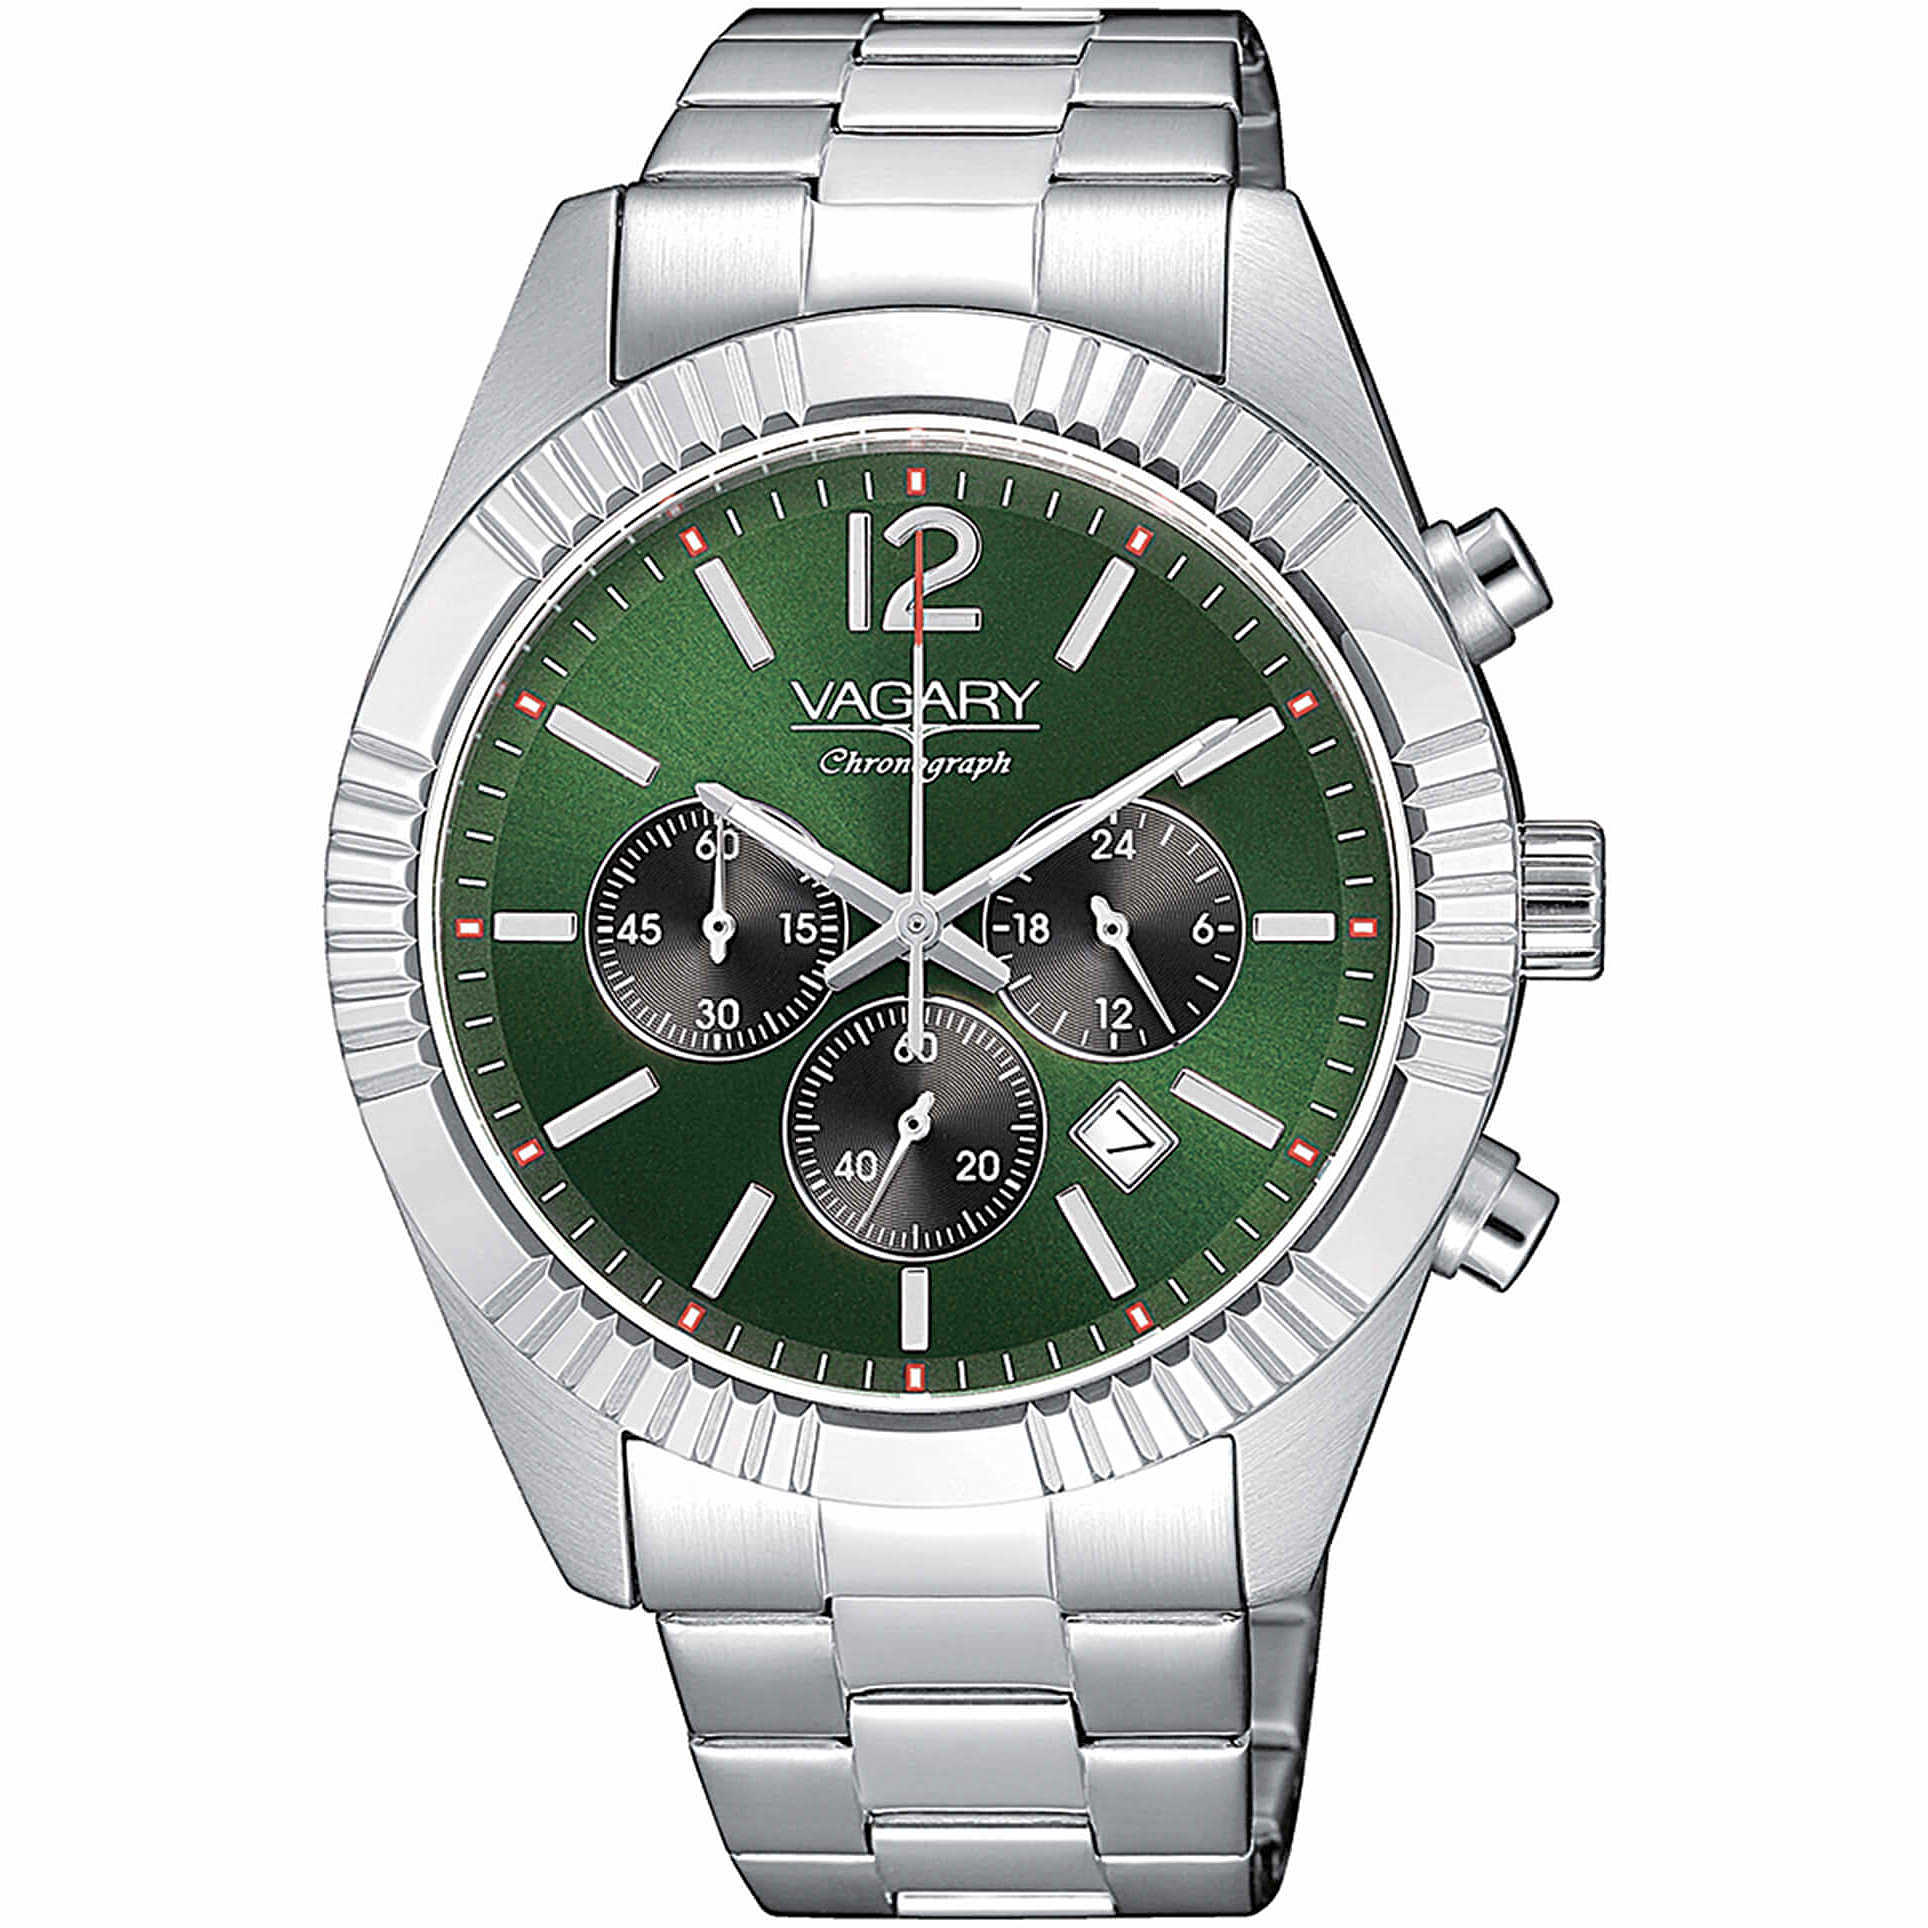 Orologio Vagary by Citizen Timeless Gents IV4-519-41